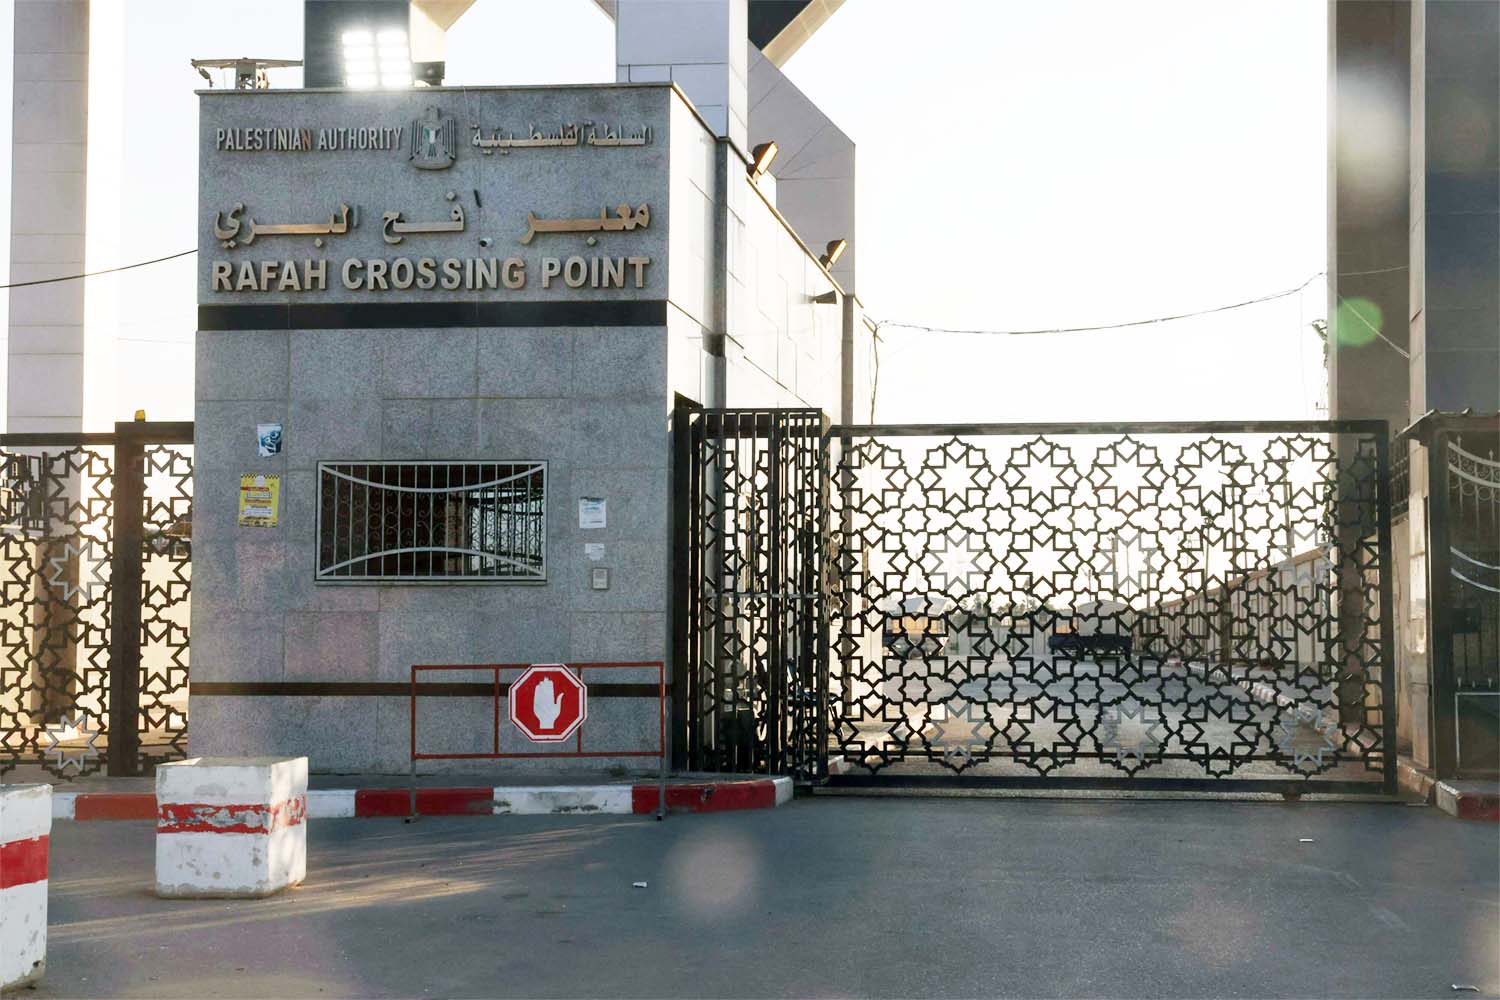 The Rafah border crossing remained shut on Wednesday morning